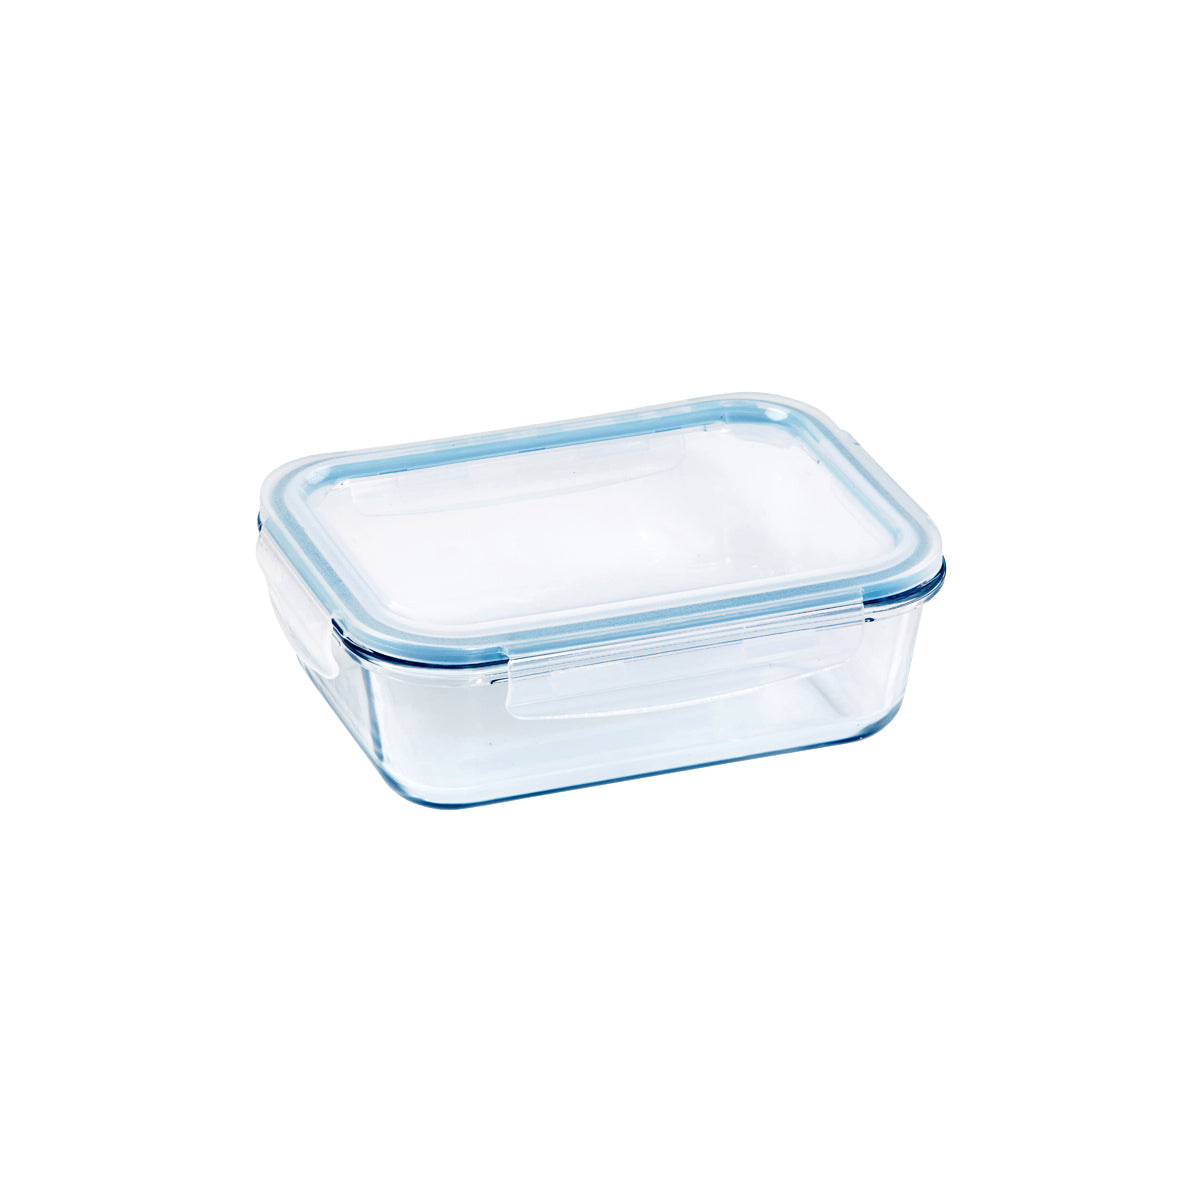 WLT48172 Wiltshire Rectangular Glass Container 1000ml Tomkin Australia Hospitality Supplies